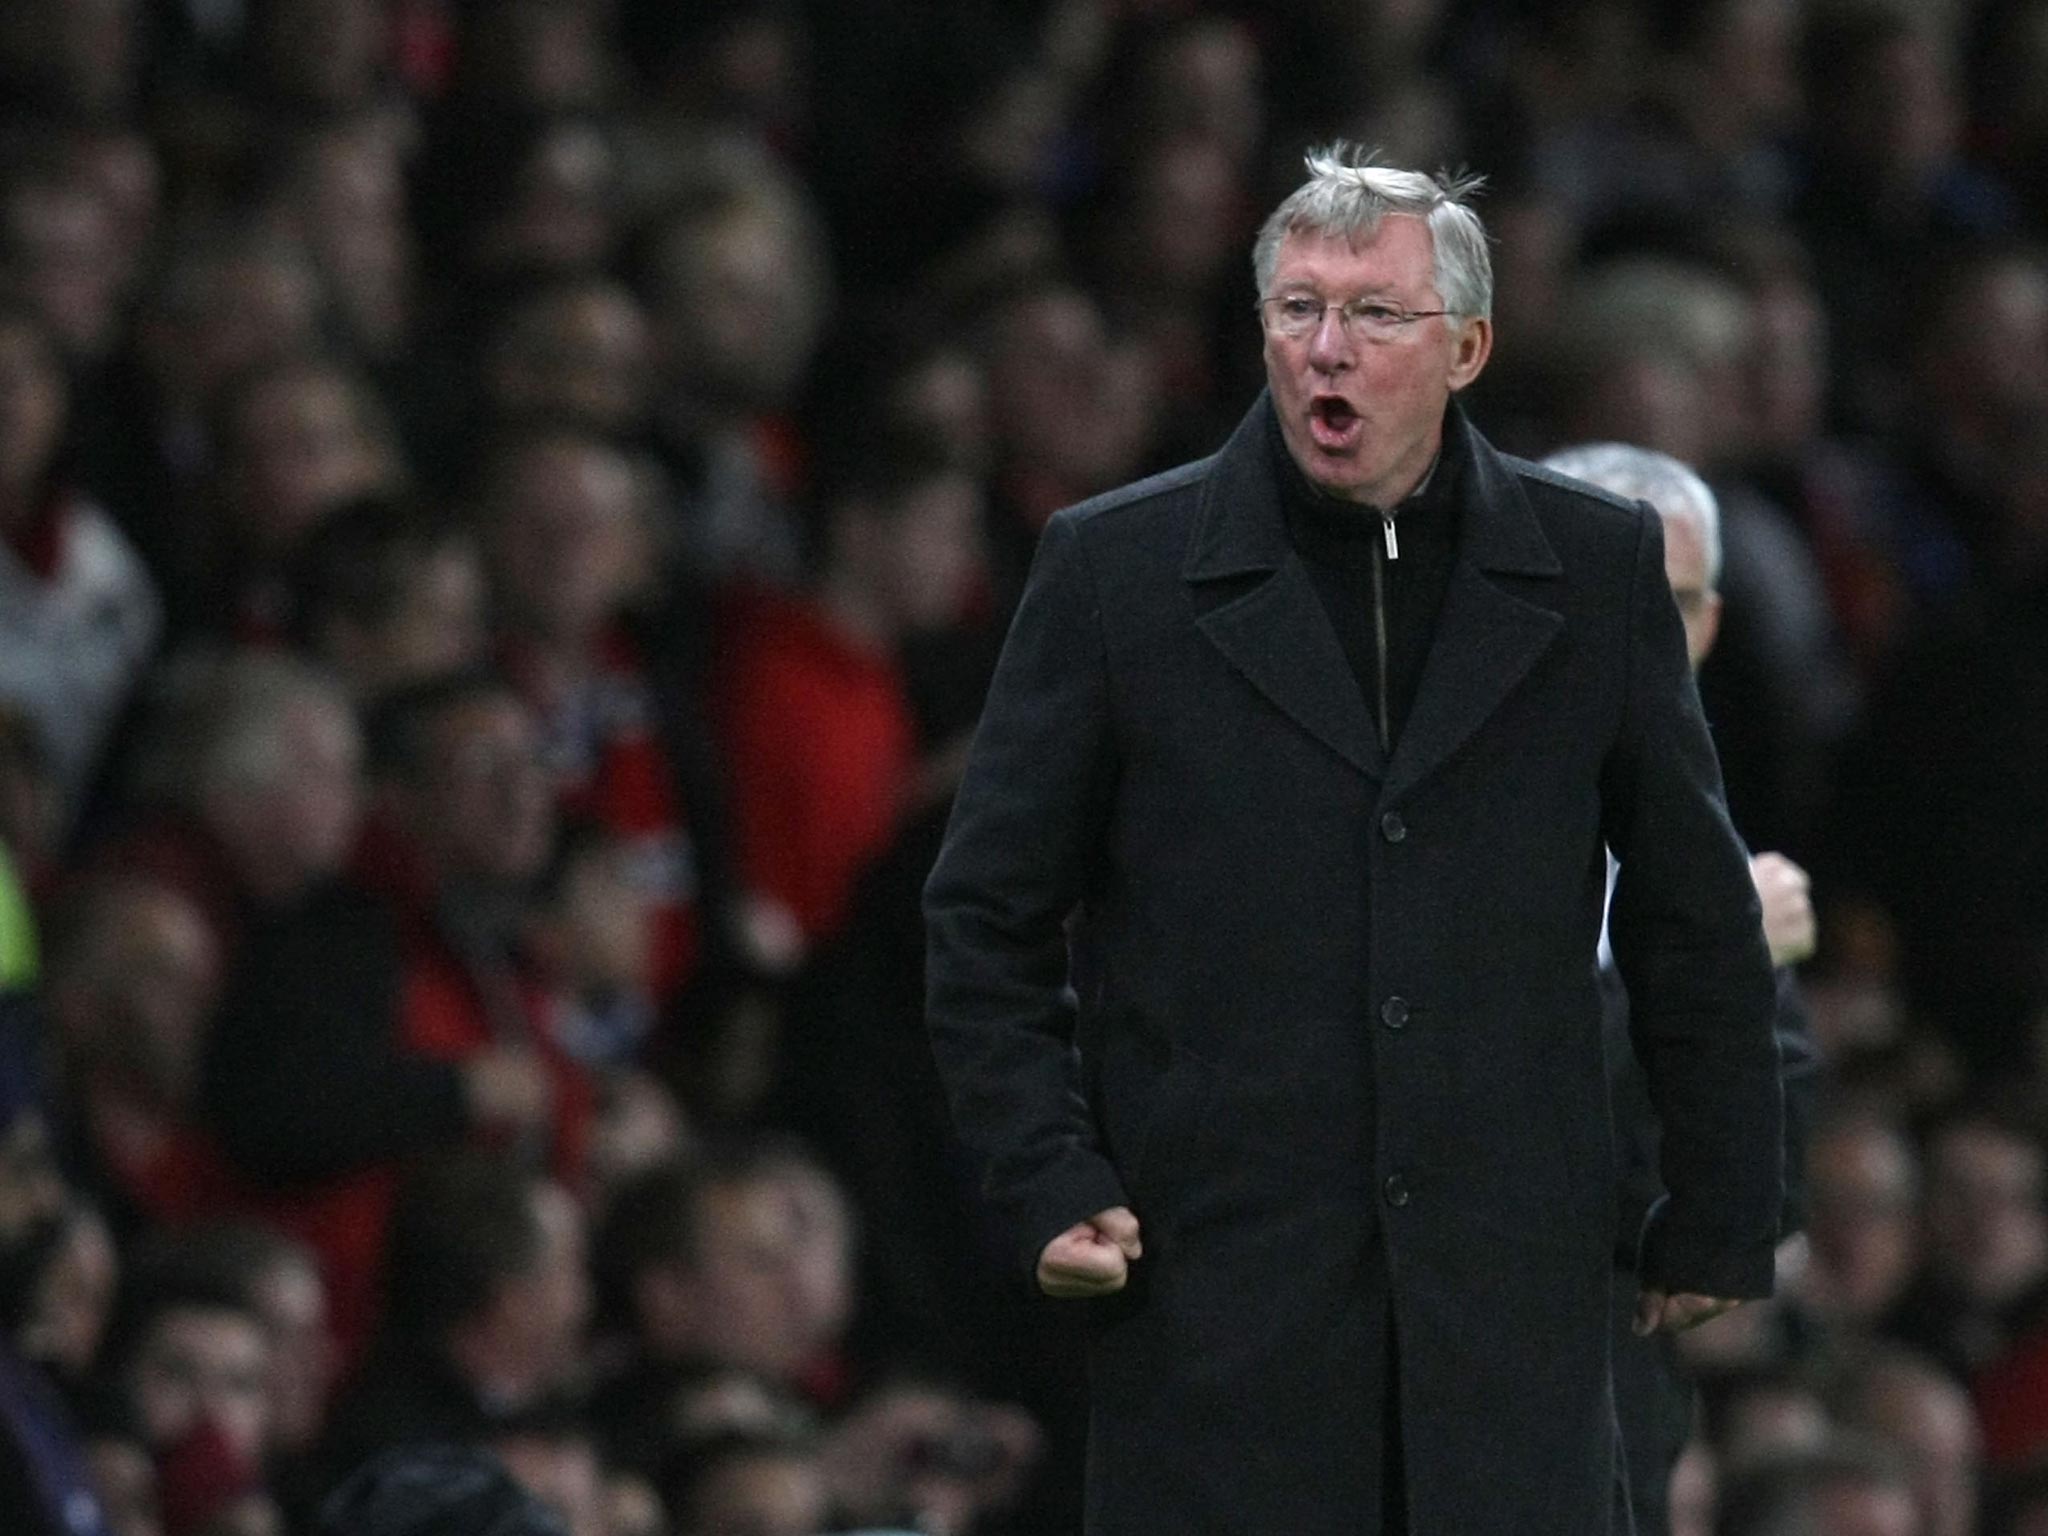 Sir Alex Ferguson of Manchester United complains to the assistant referee during the Barclays Premier League match between Manchester United and Newcastle United